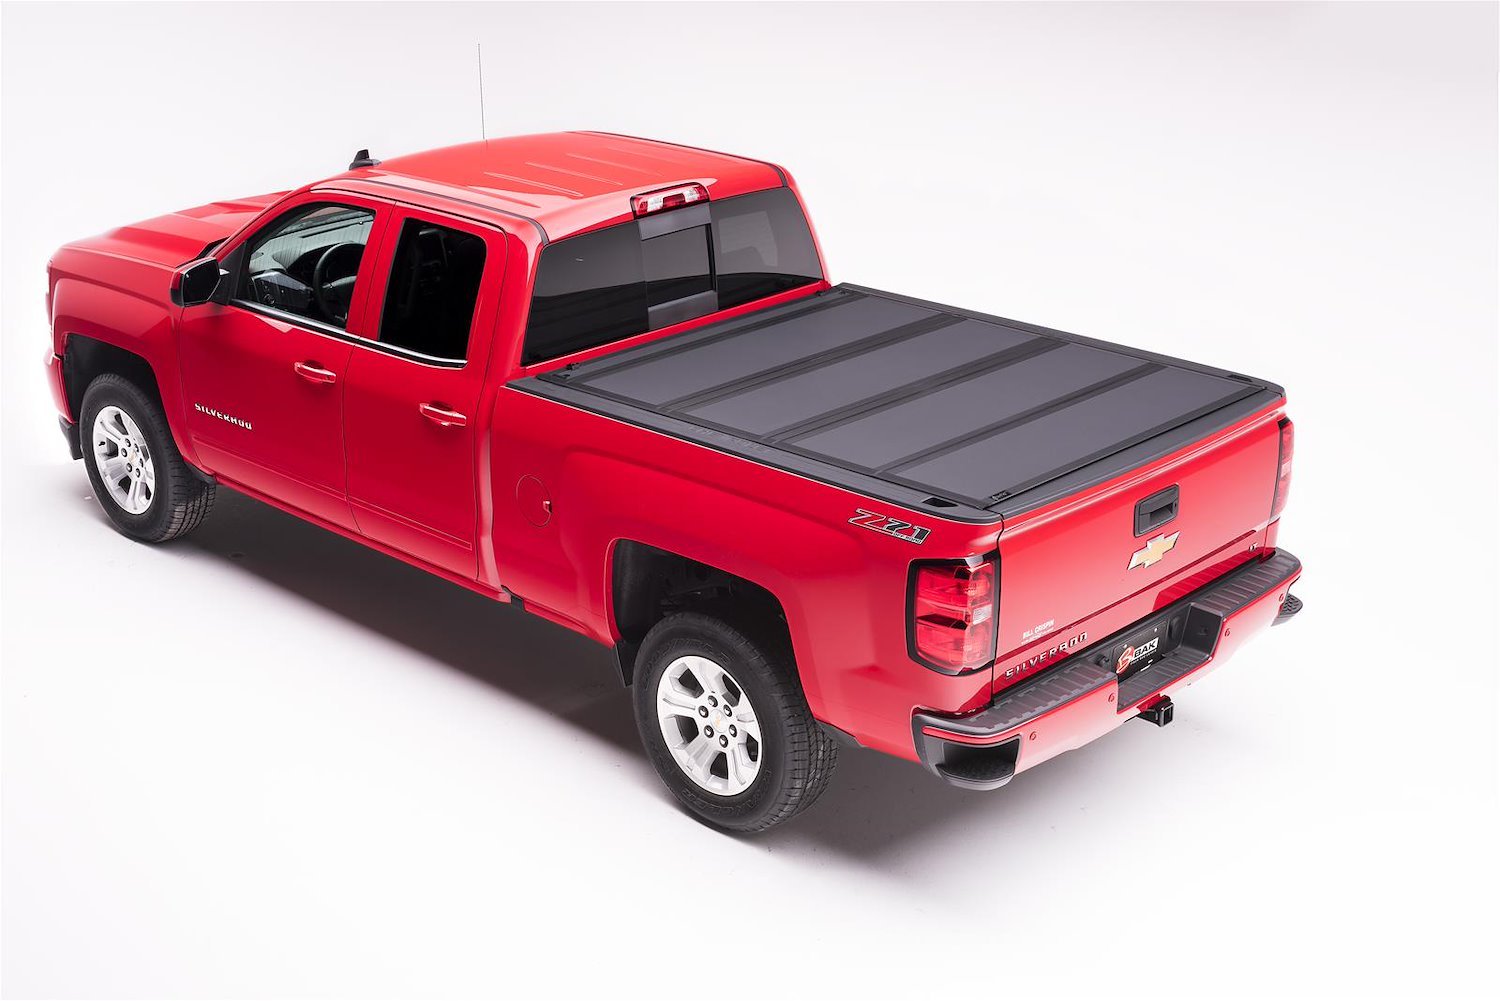 448121 BAKFlip MX4 for 15-18 GM Silverado/Sierra/2019 Legacy/Limited 6.7 ft. Bed, Hard Folding Cover Style [Black Finish]